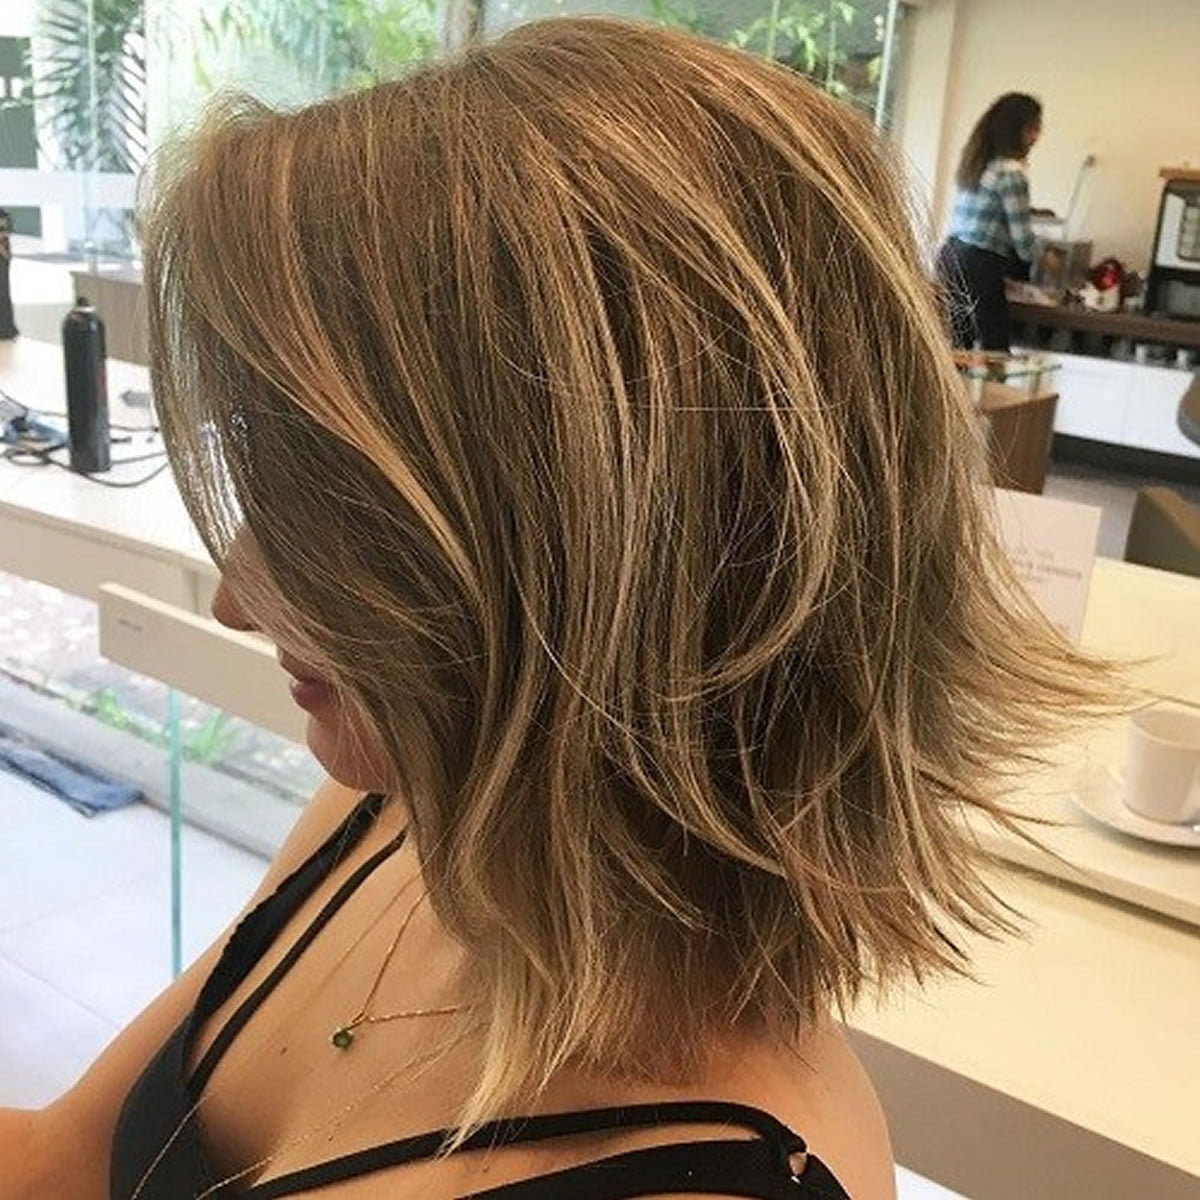 Long bob haircuts ideas that will bring beauty to your beauty – HAIRSTYLES